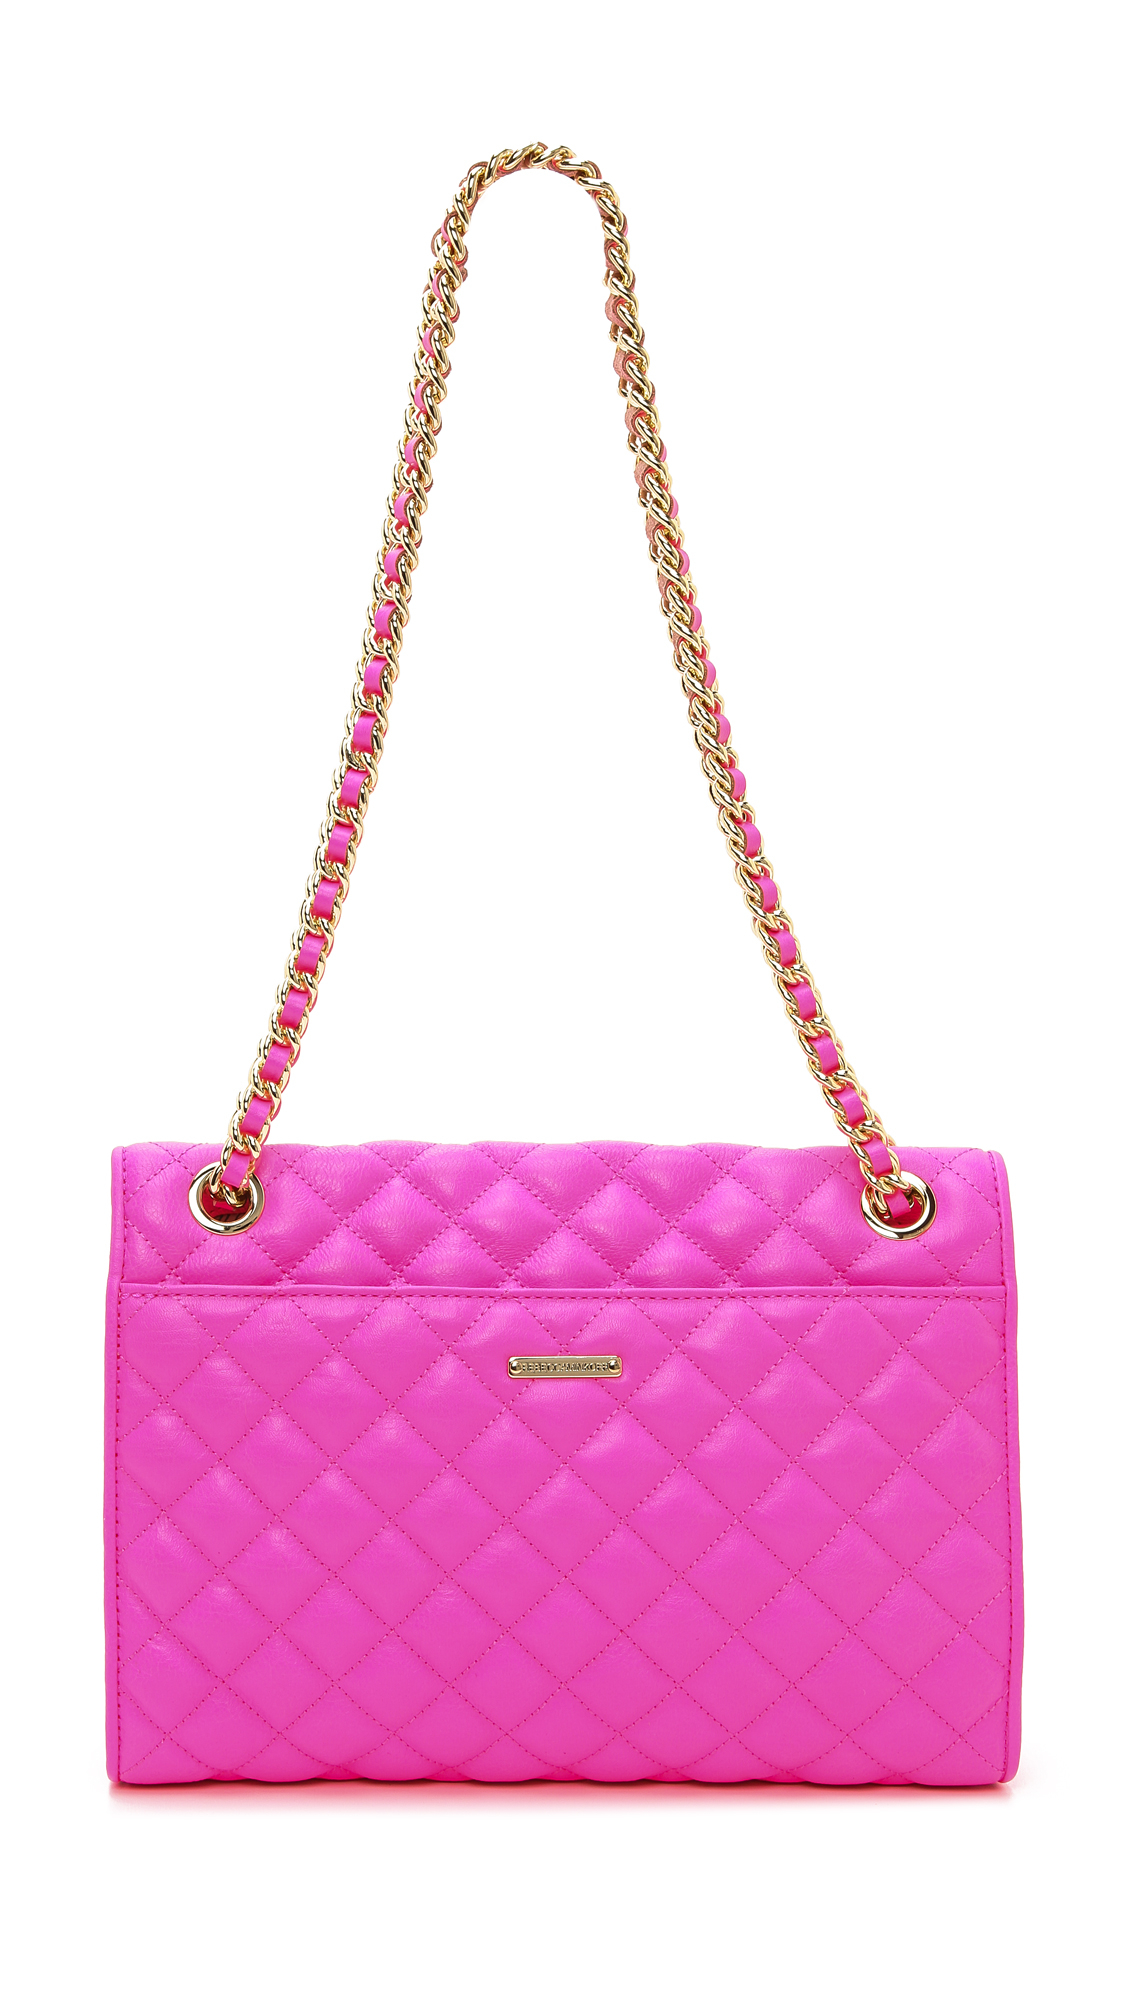 Rebecca minkoff Neon Quilted Affair Bag in Pink | Lyst